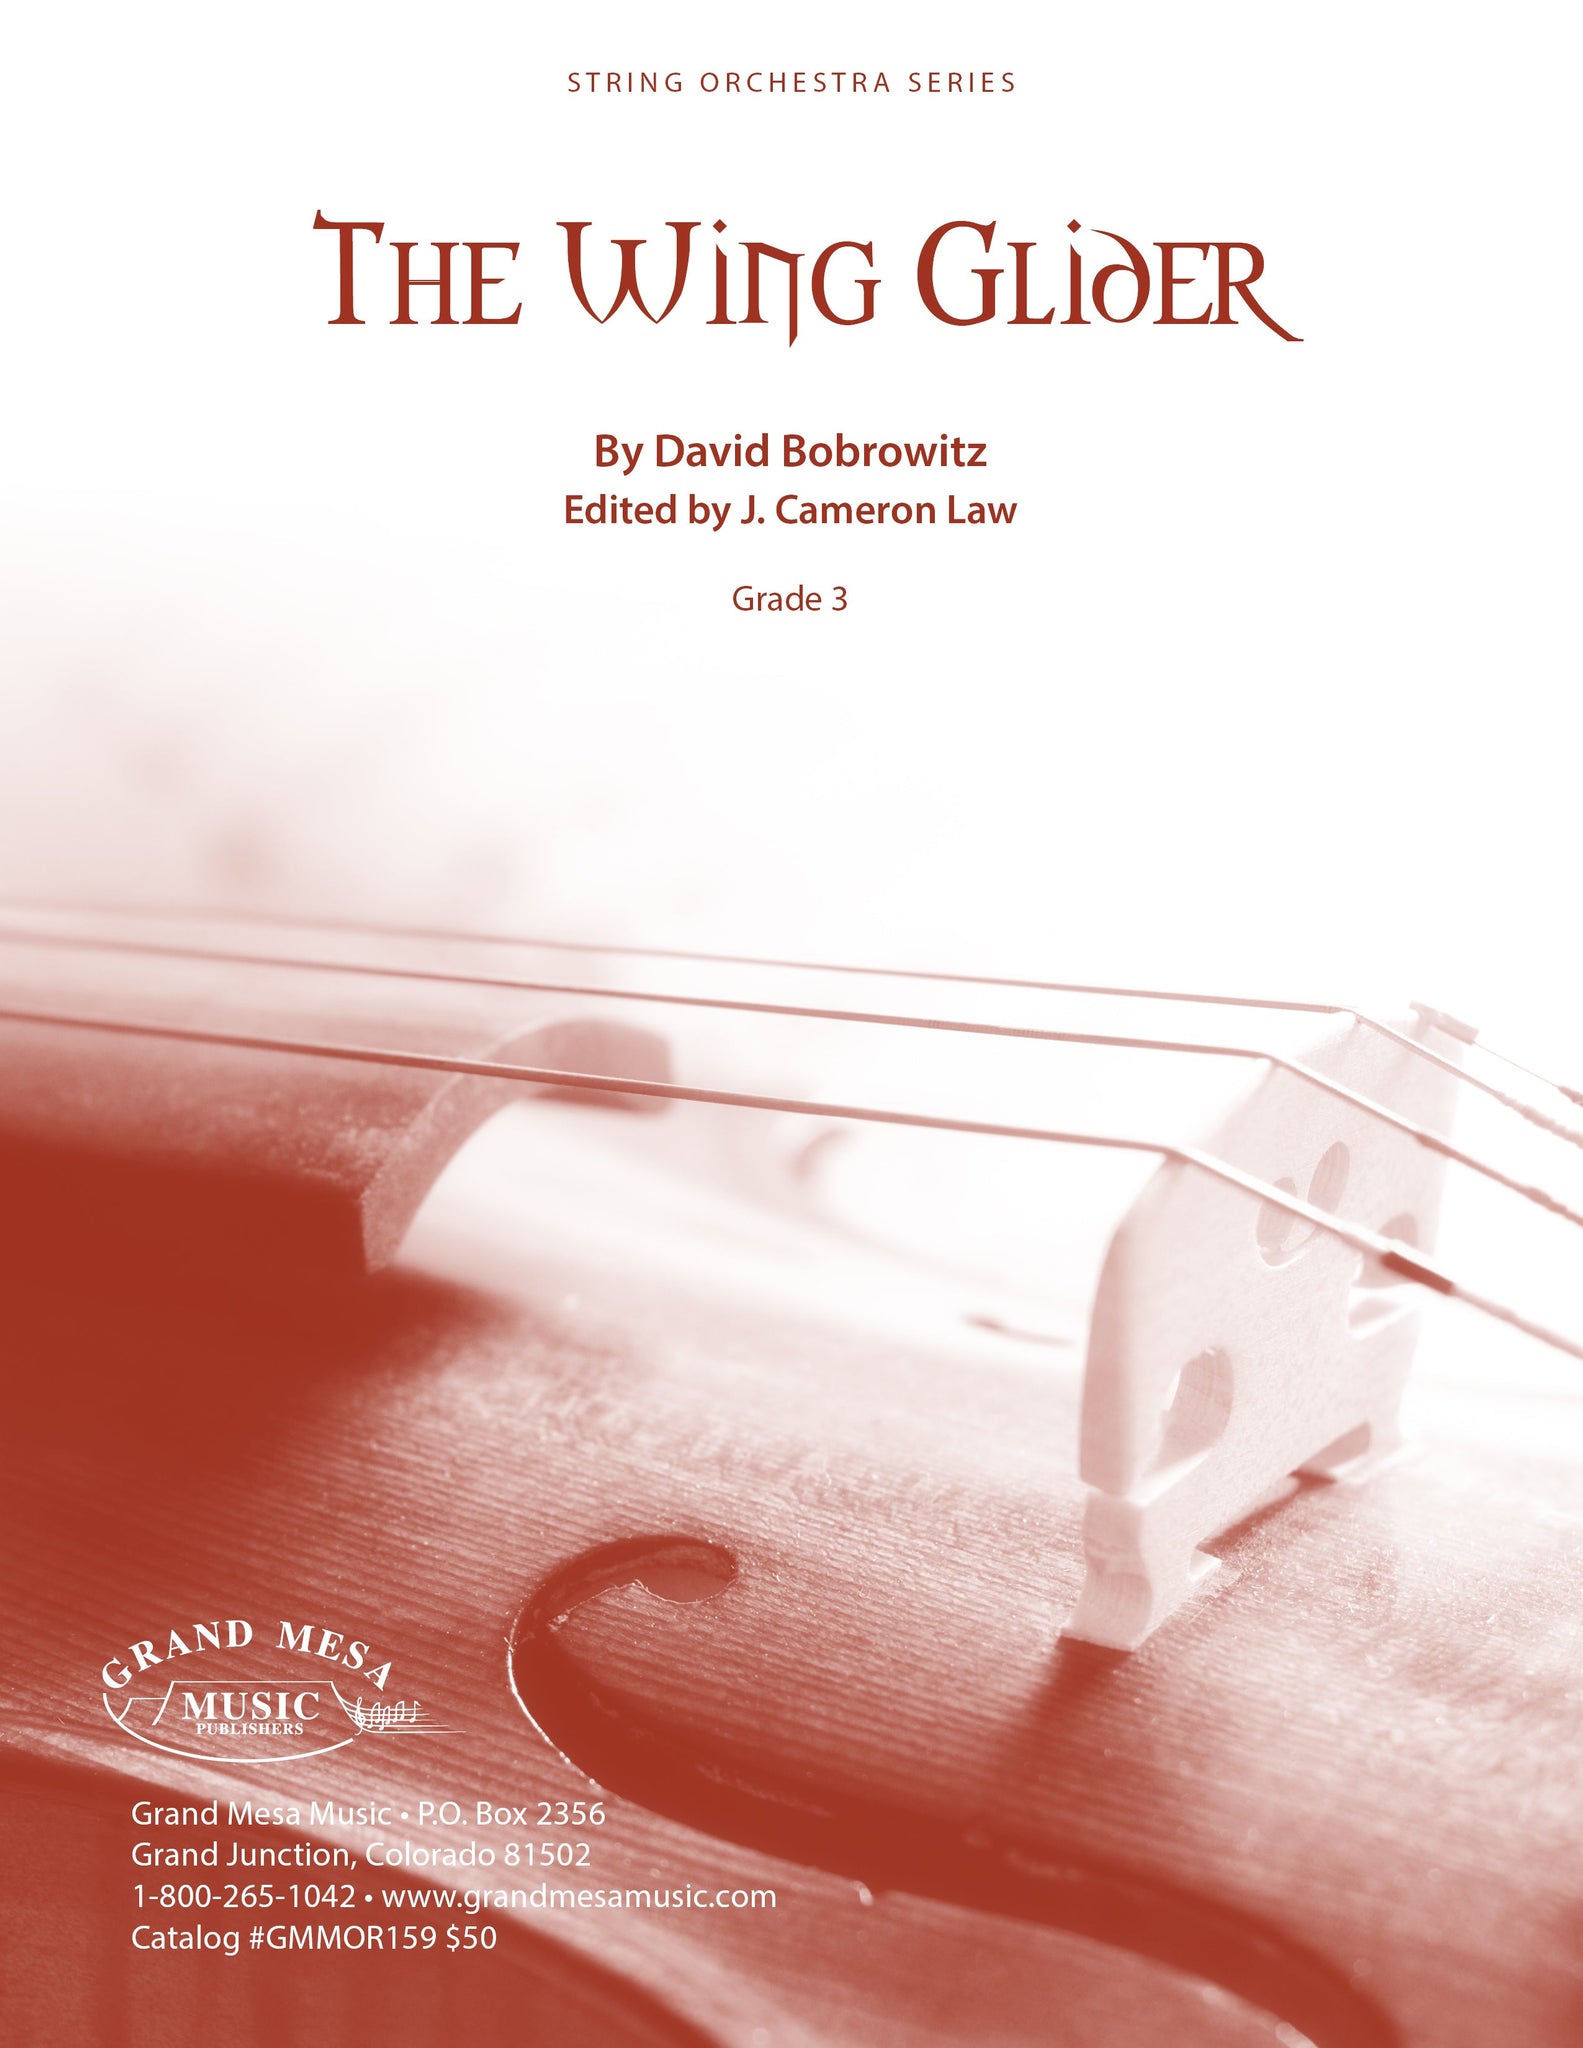 Strings sheet music cover of The Wing Glider, composed by David Bobrowitz.